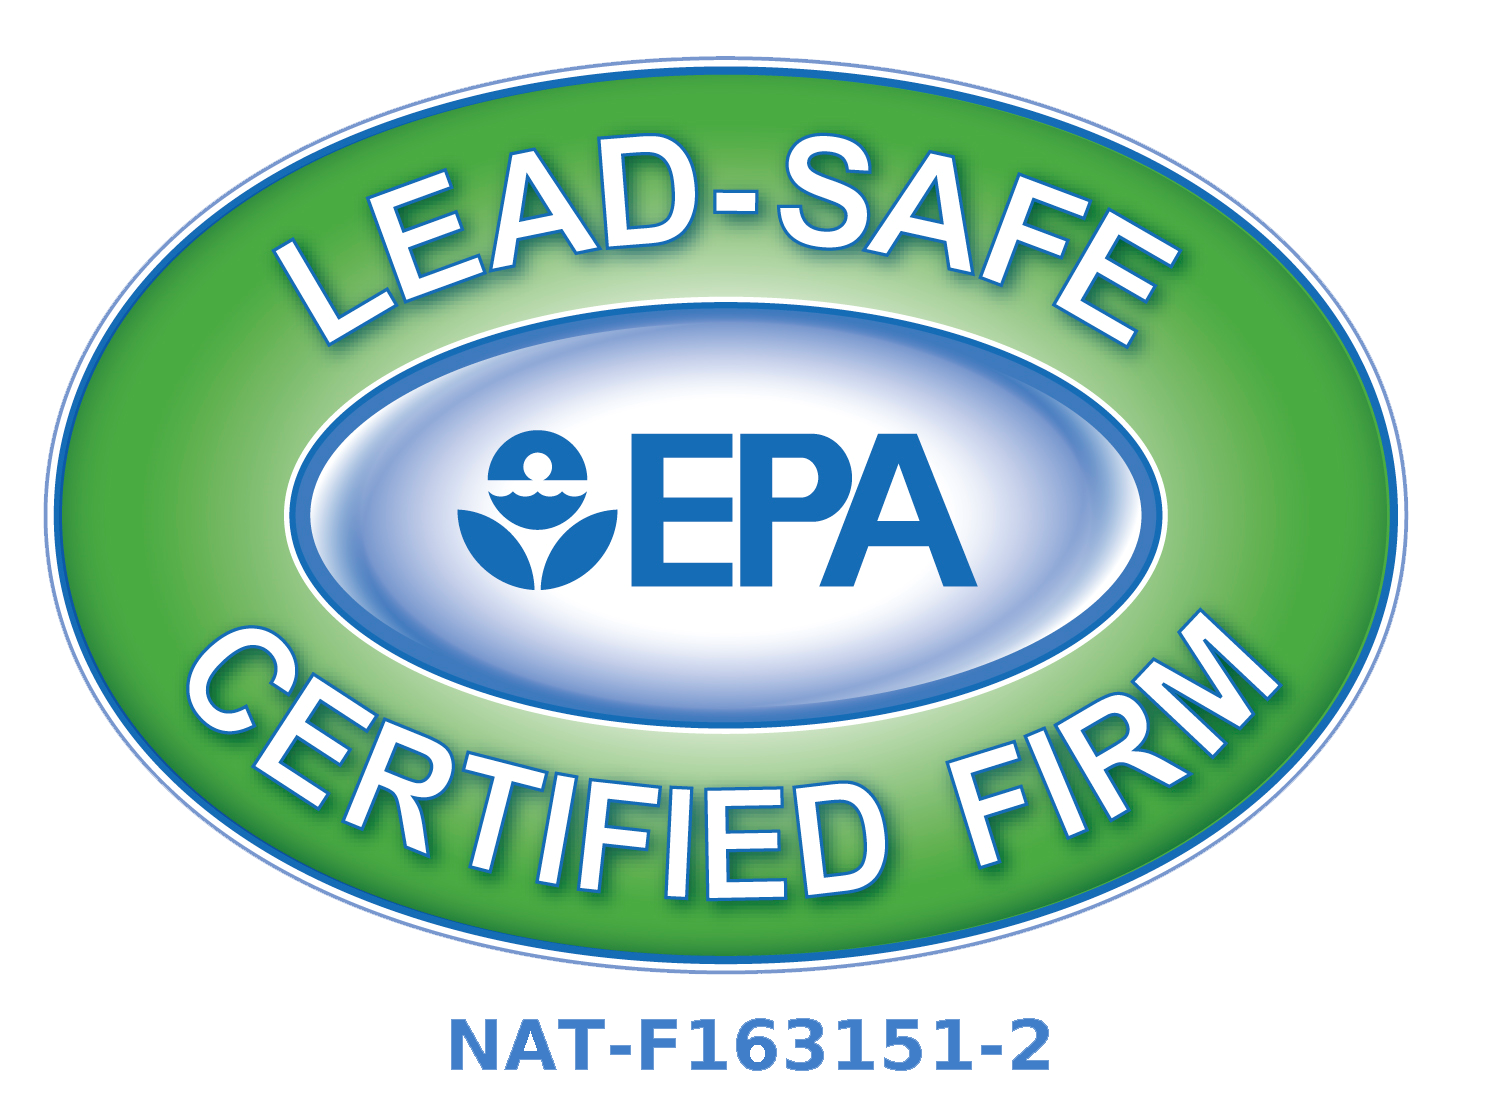 WFA's Custom Hardwood Floors is a part of the lead-safe certified firm